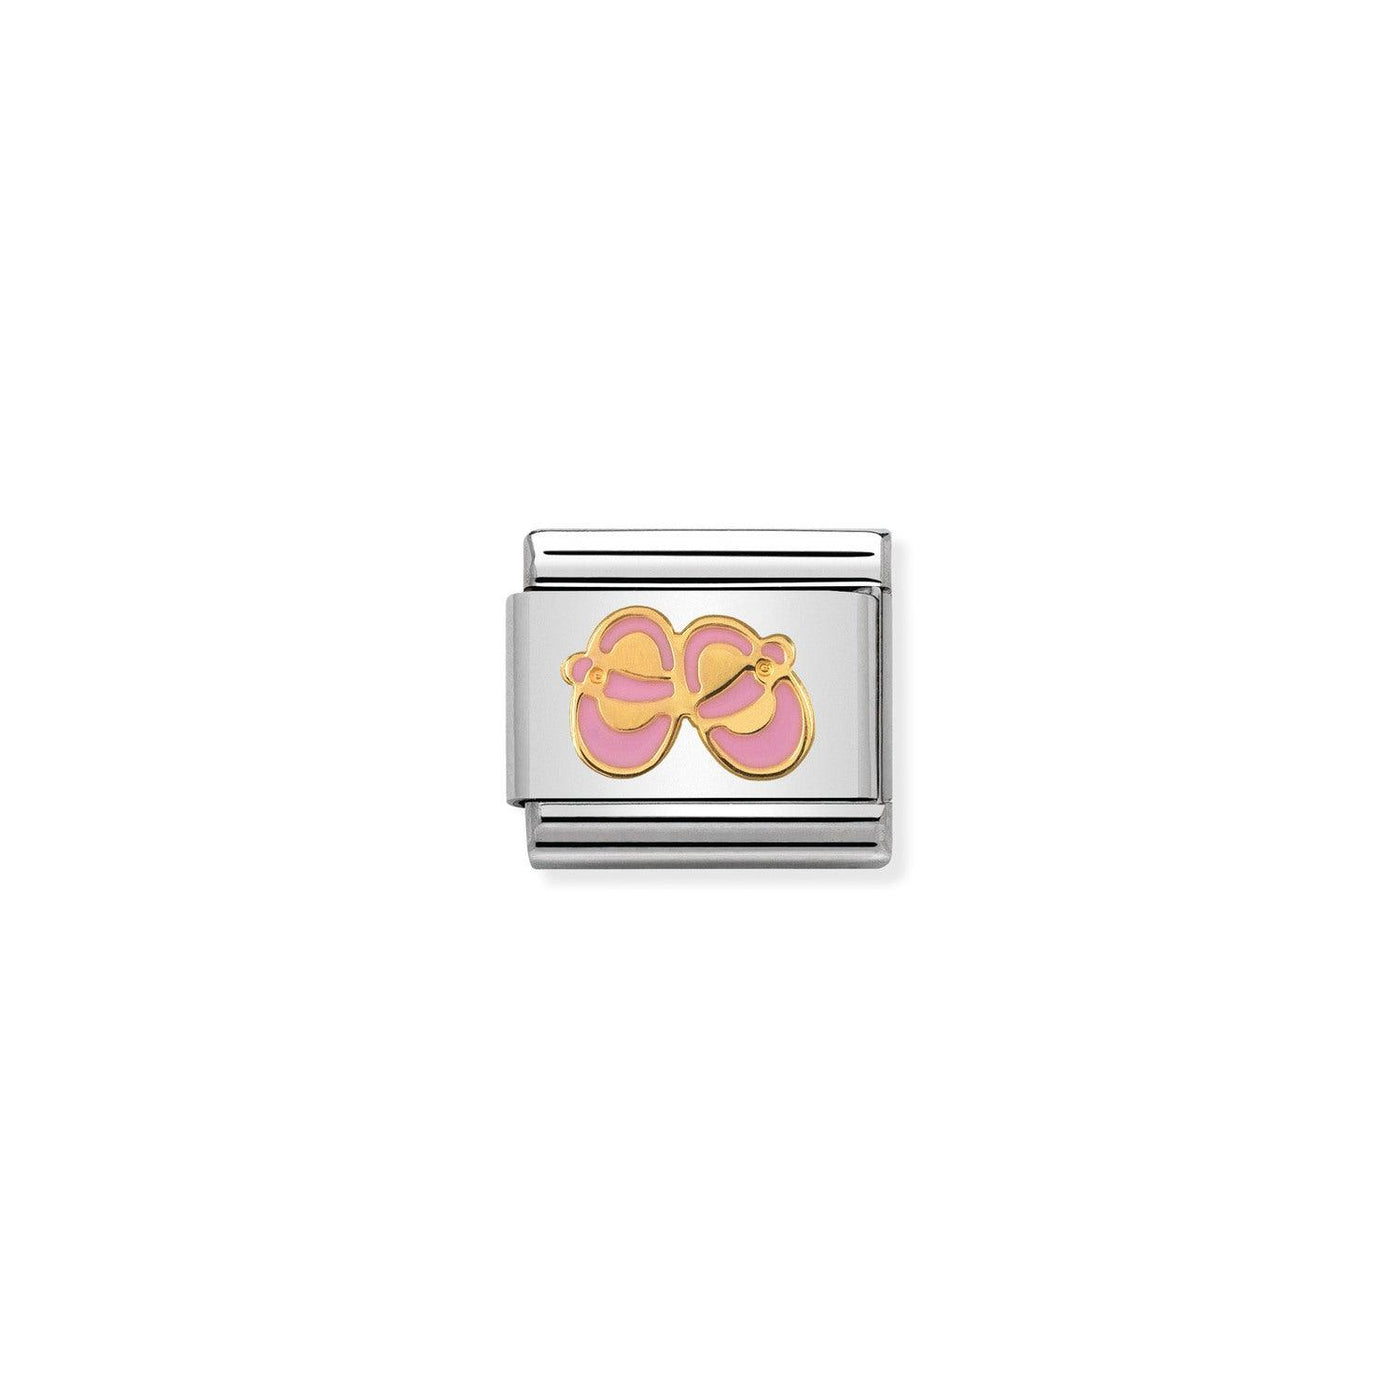 Nomination Classic Gold and Pink Shoes Link Charm - Rococo Jewellery